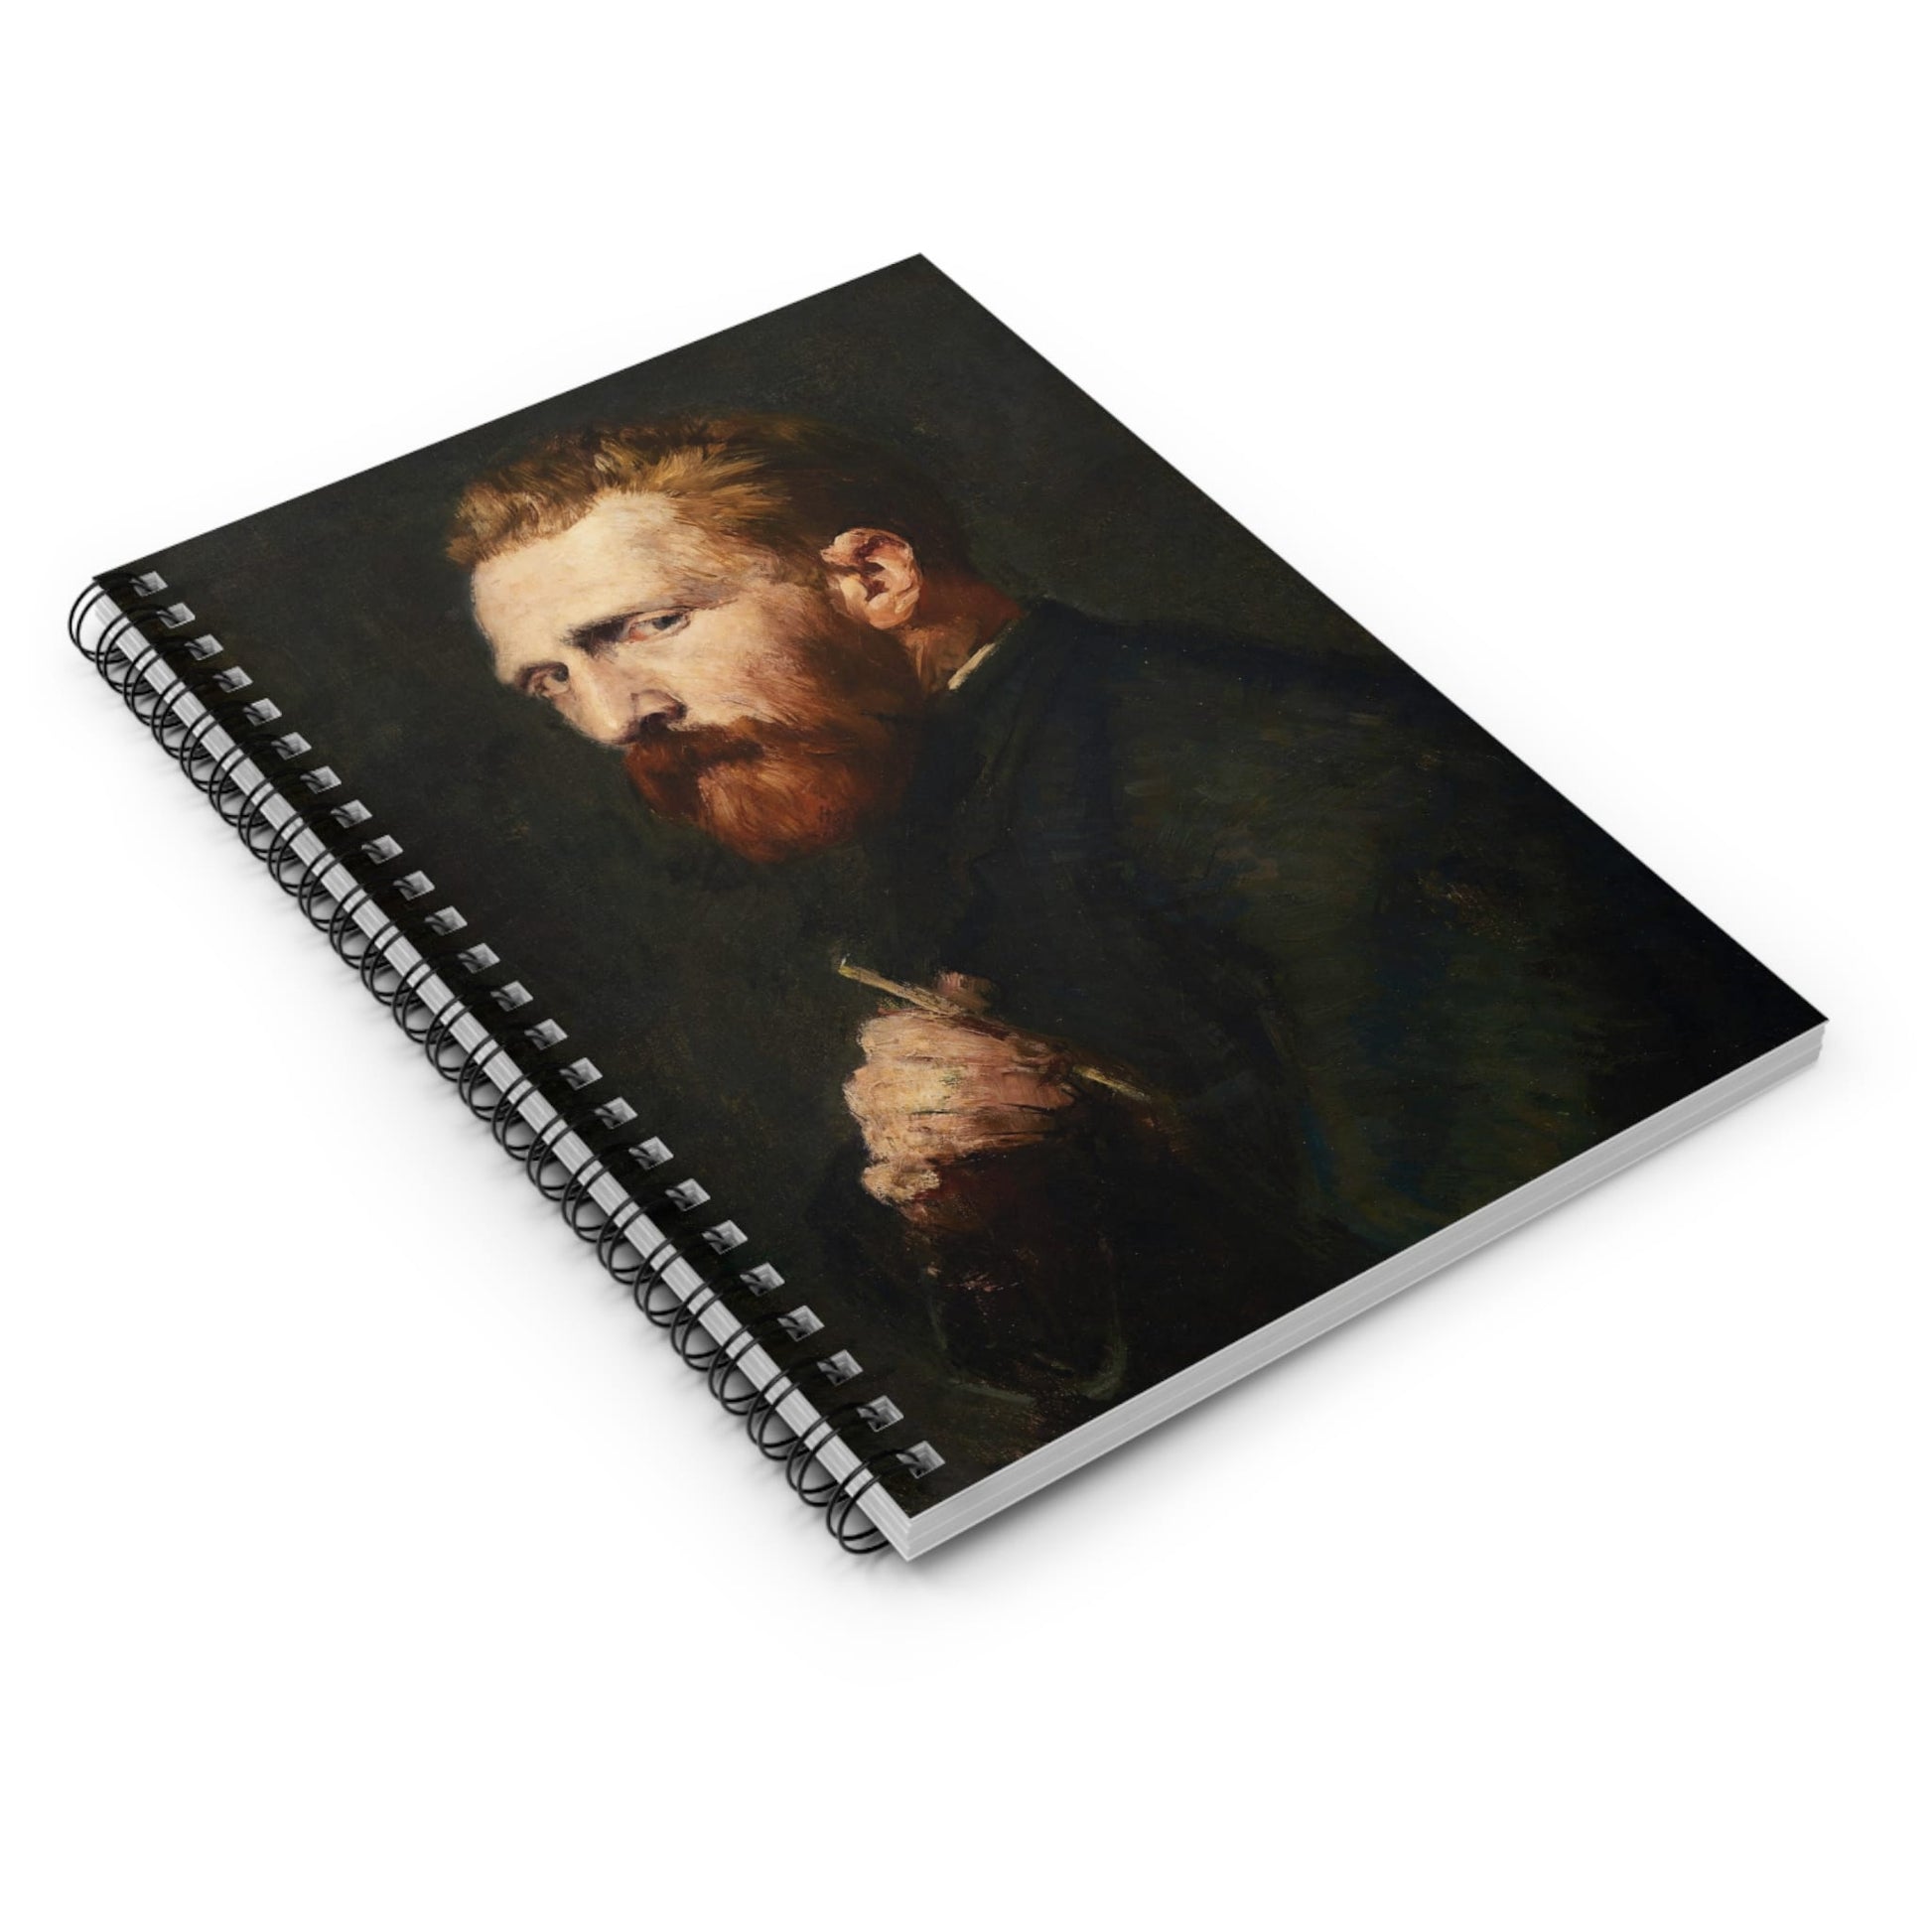 The Painter Spiral Notebook Laying Flat on White Surface